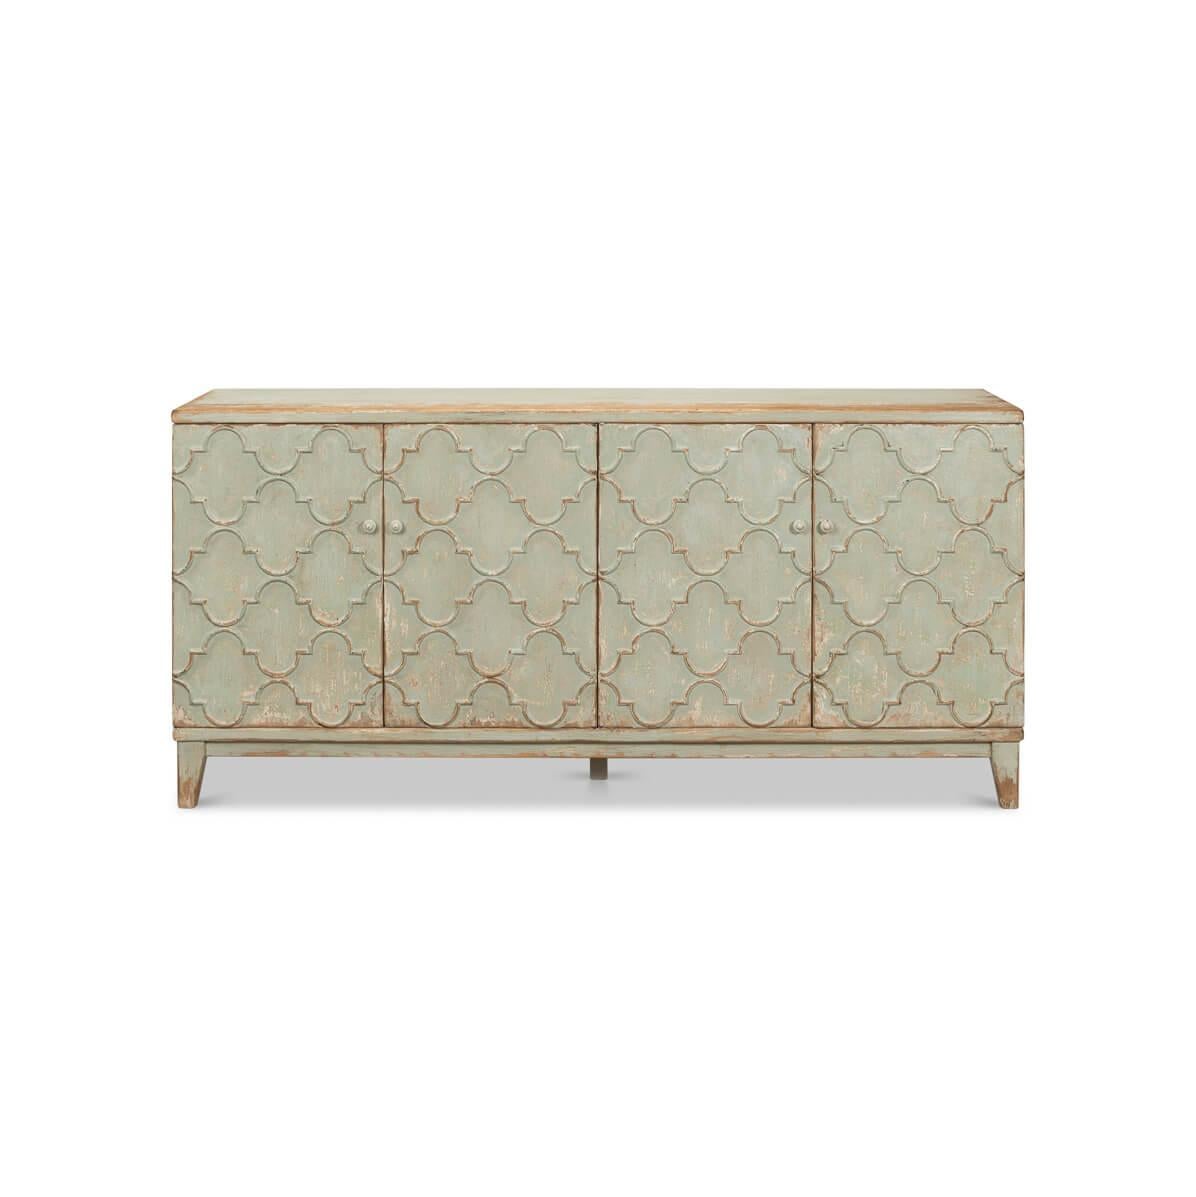 This exquisite piece boasts a tranquil sage green finish, gently distressed to reveal undertones of natural wood for a perfectly aged look. The front fascia is adorned with arabesque mosaic patterns, creating a captivating visual. Behind the four